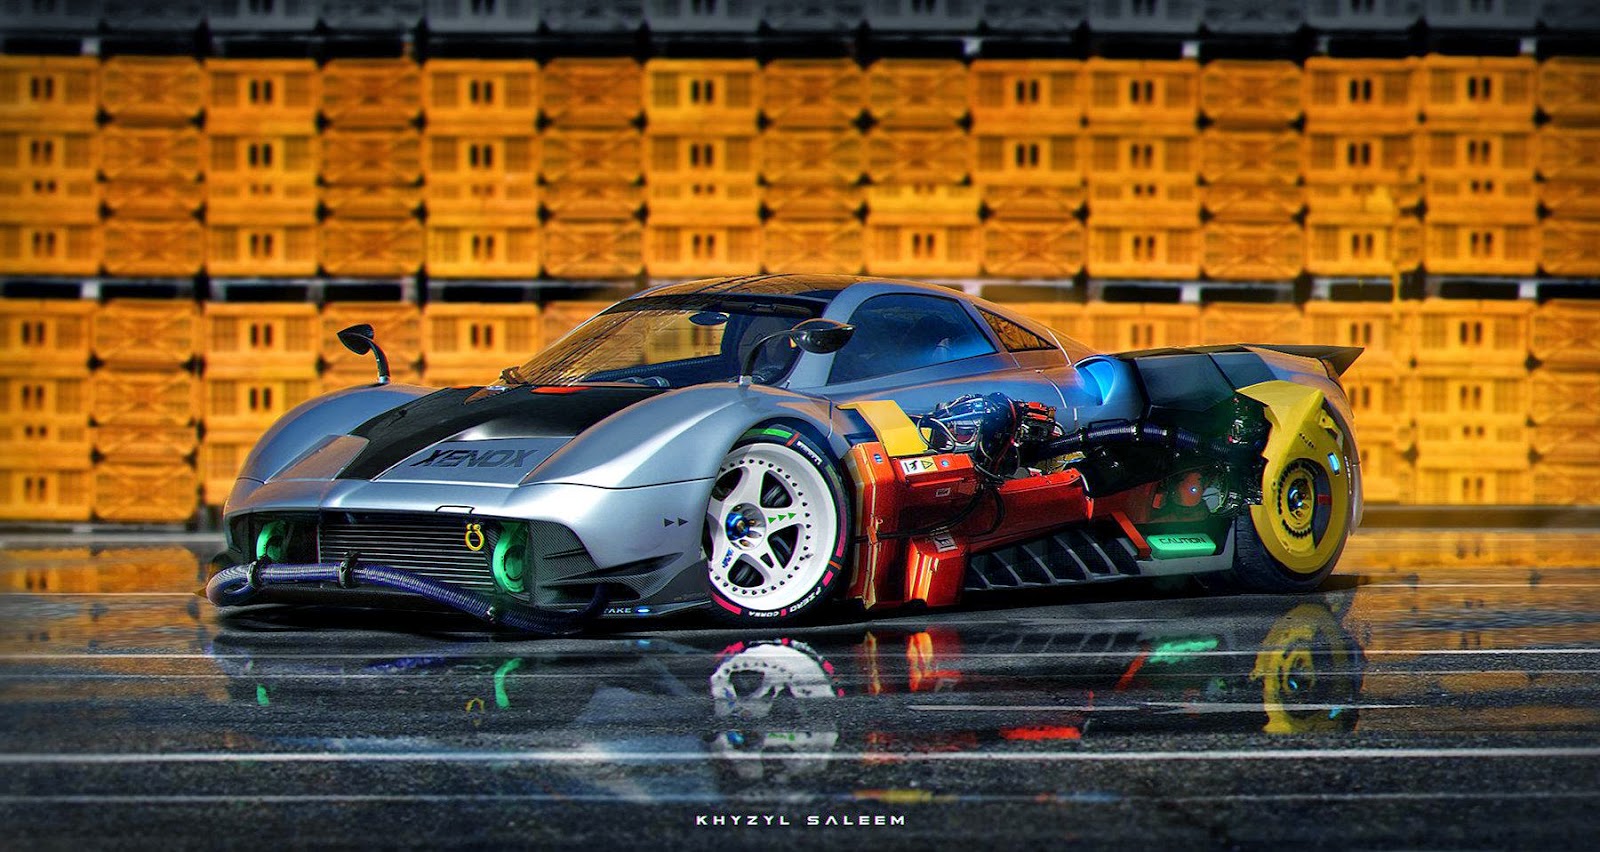 Sci Fiction Concept Car Wallpaper Made By Year Old Artist